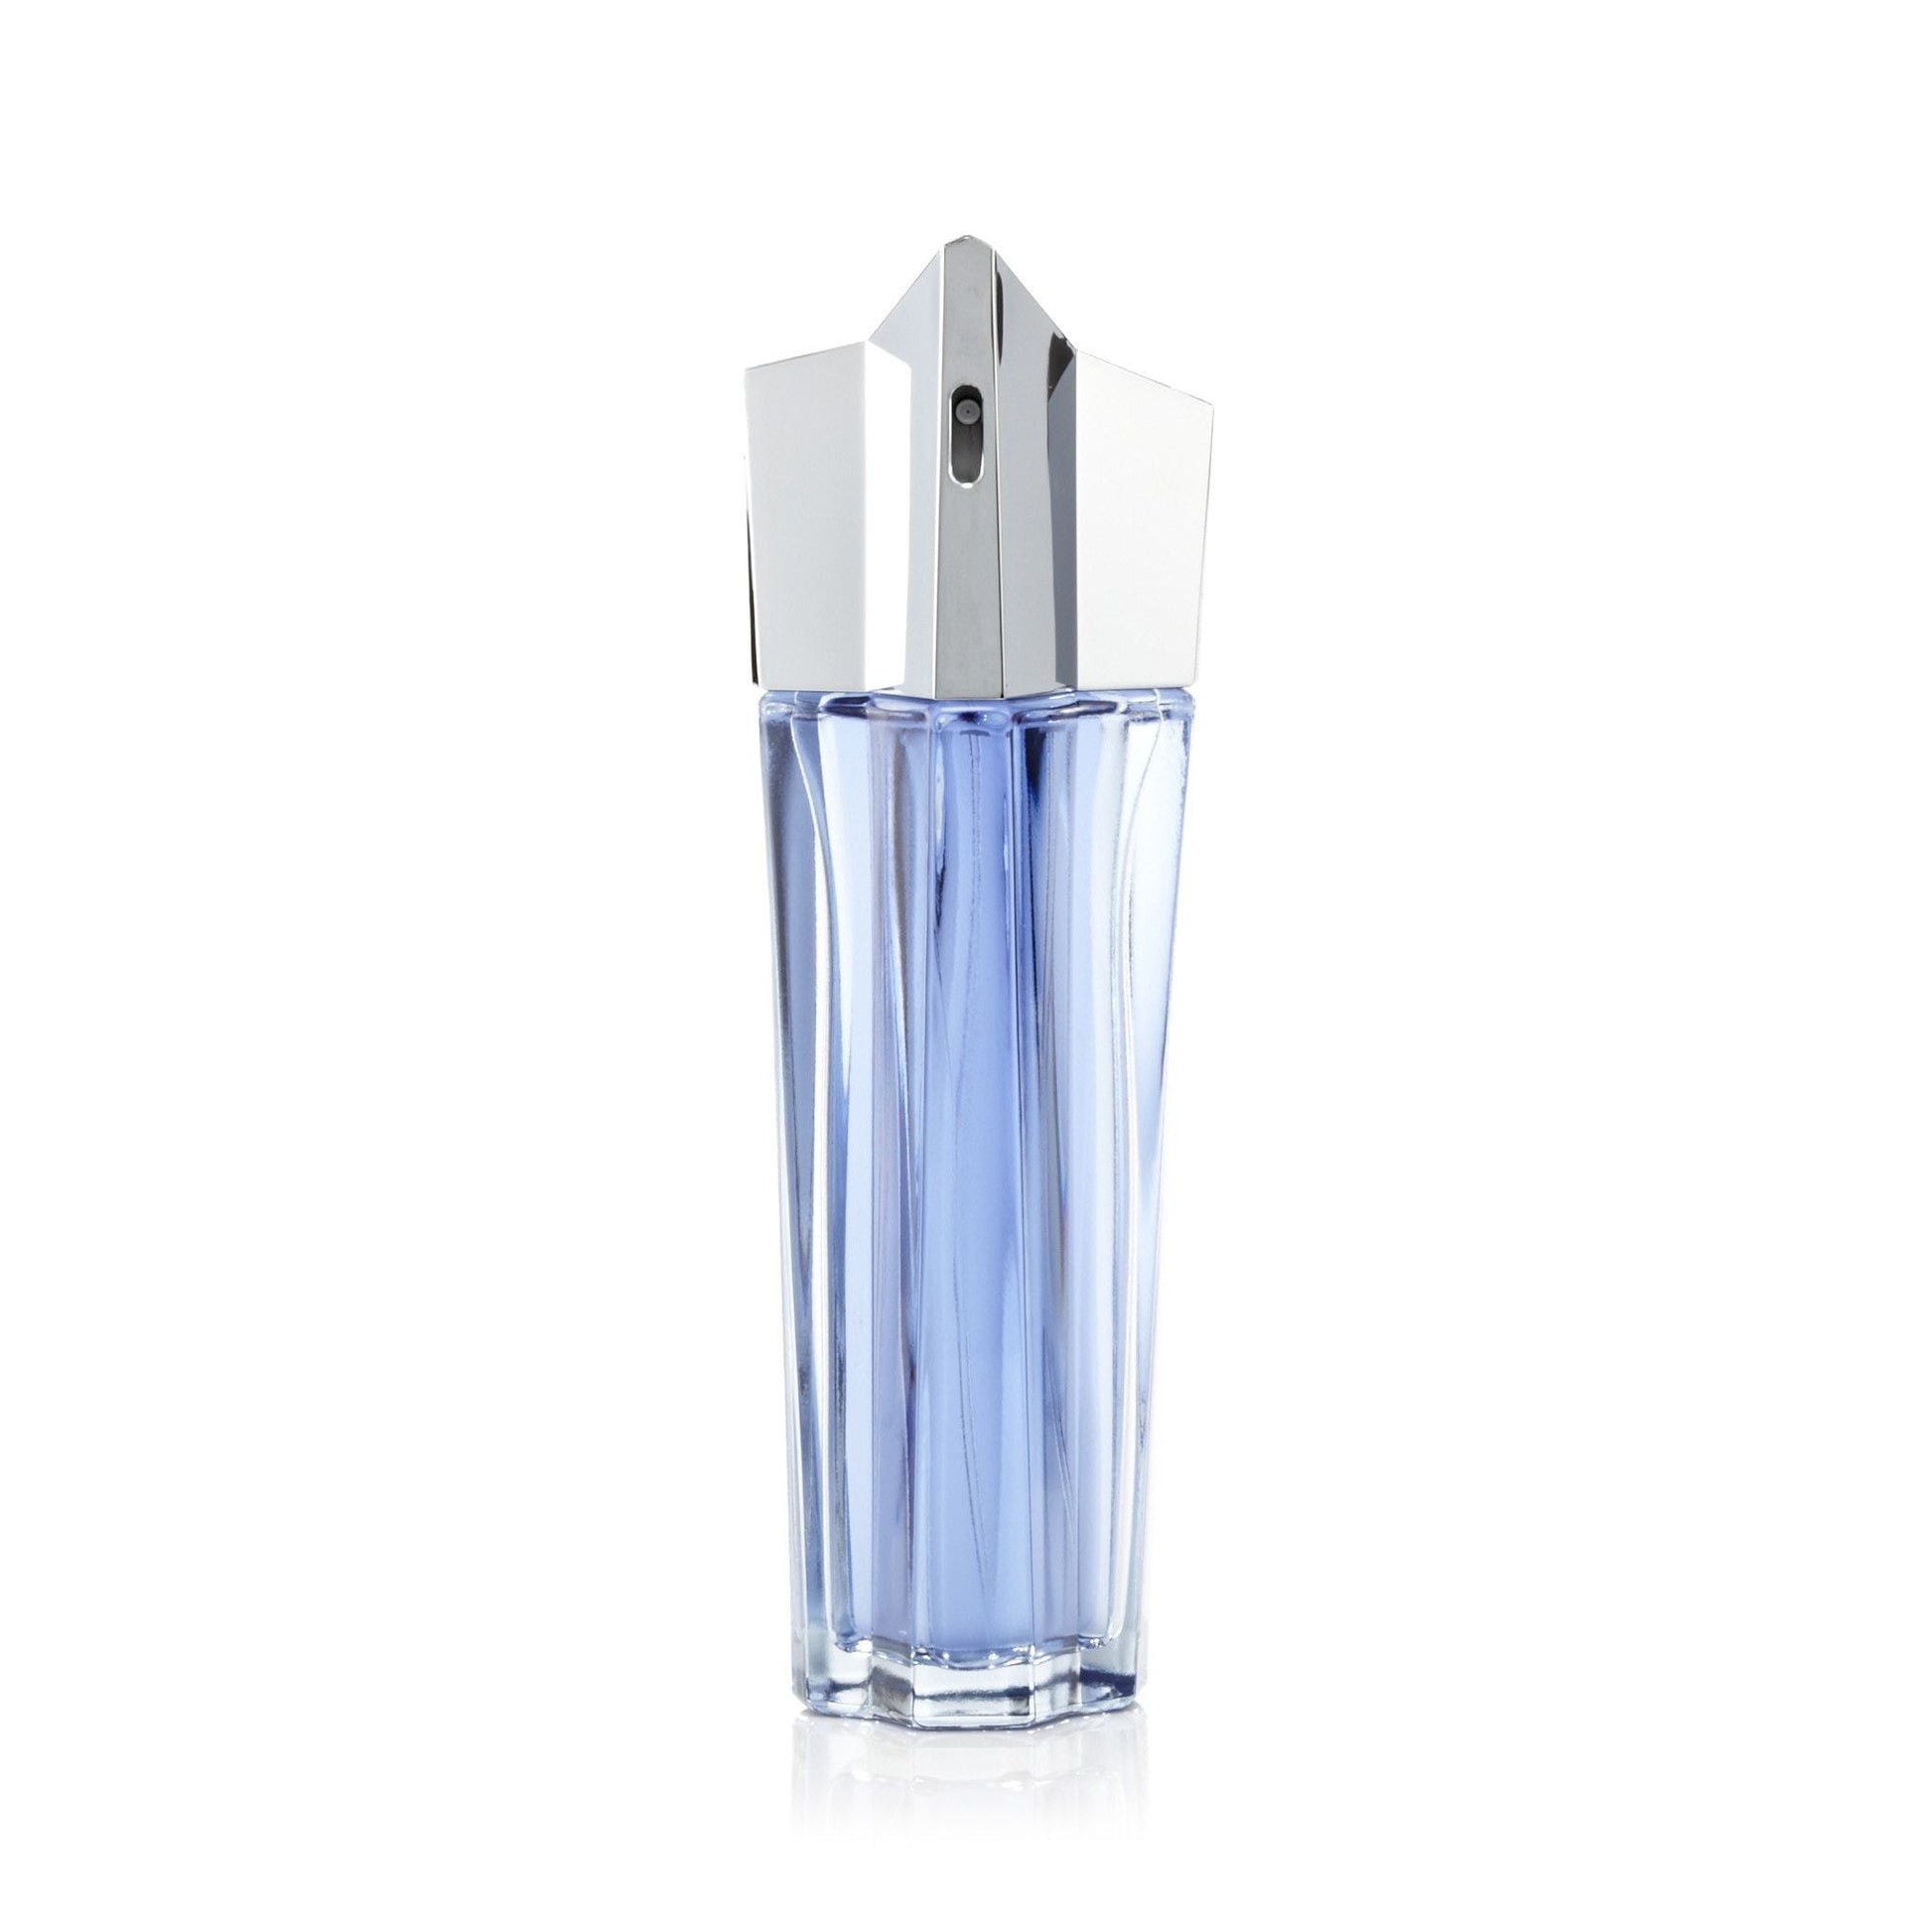 Angel Refillable Eau de Parfum Spray for Women by Thierry Mugler, Product image 2